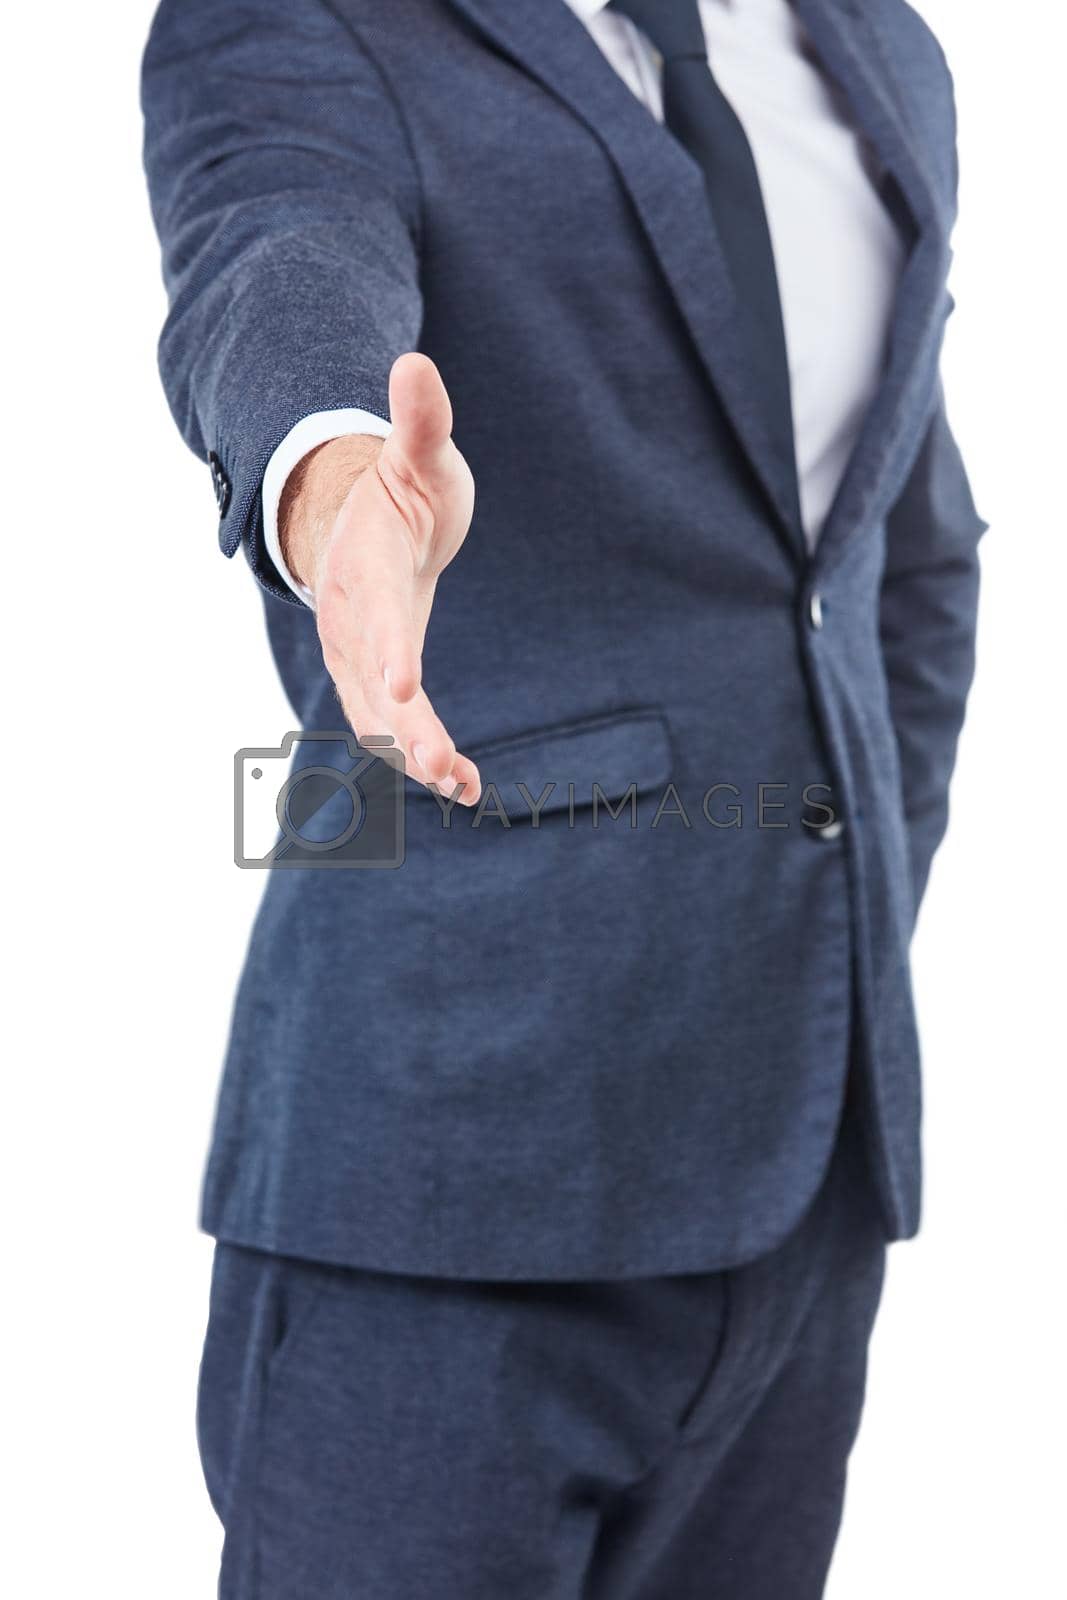 Royalty free image of I have a great deal for you. Studio shot of an unrecognizable businessman reaching in for a handshake. by YuriArcurs